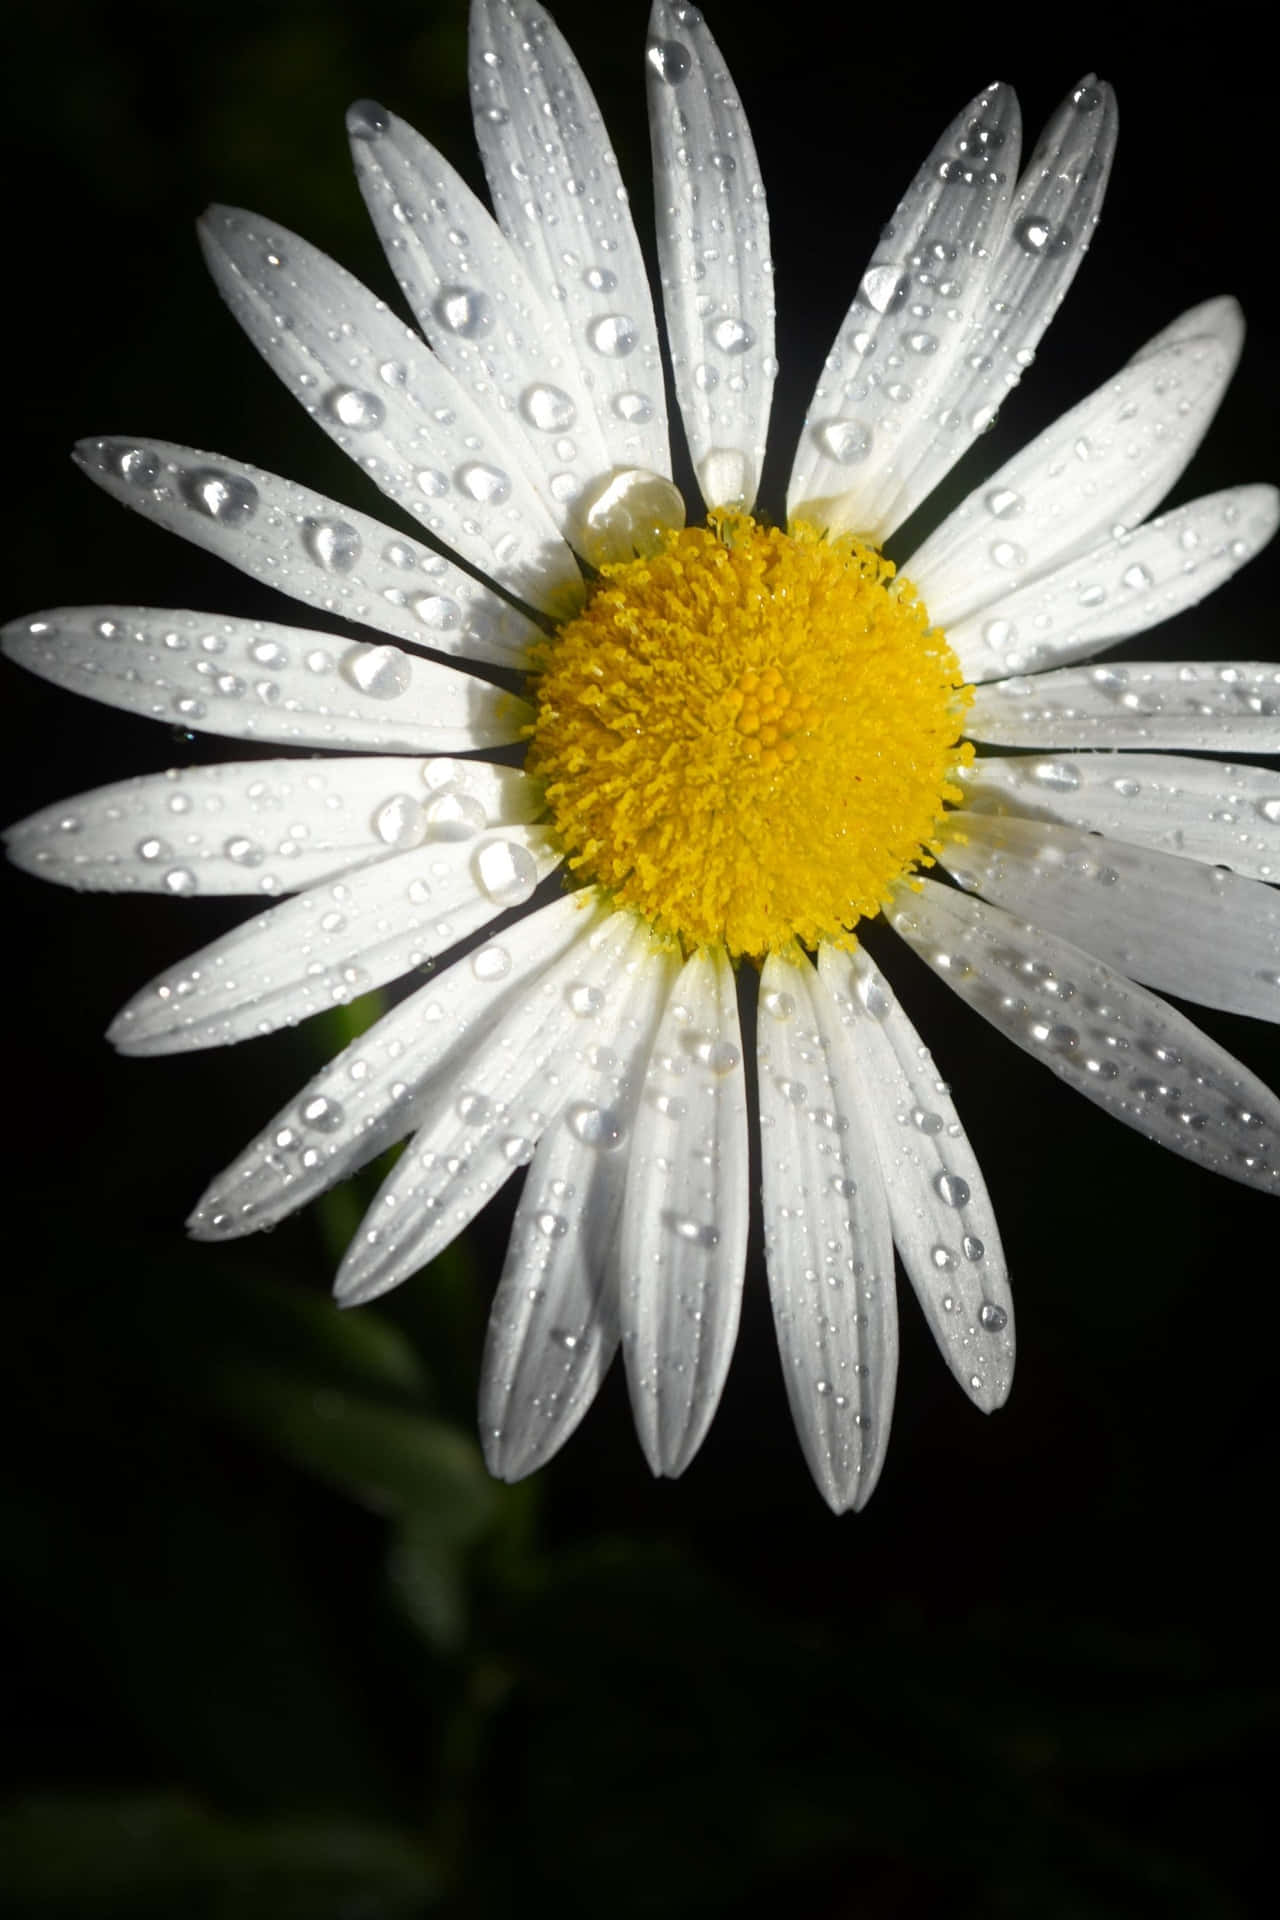 "A daisy leaning in towards the sun, basking in its warm embrace." Wallpaper